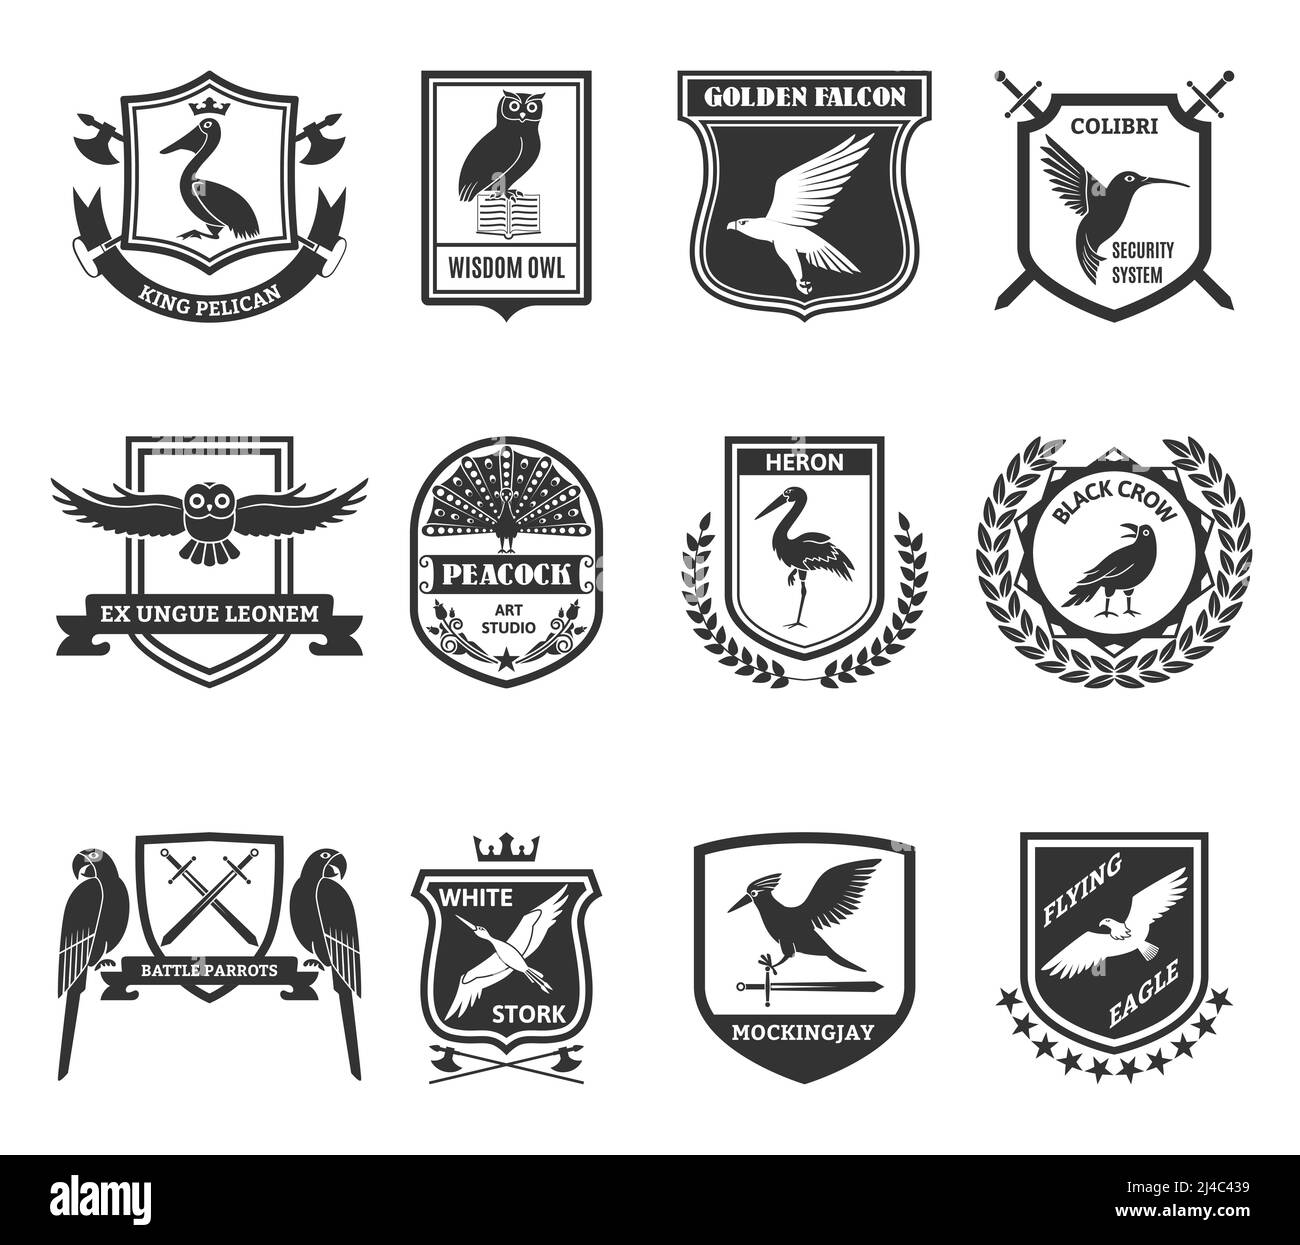 Birds black emblems collection with colibri hummingbird security system shield and golden falcon label abstract isolated vector illustration Stock Vector